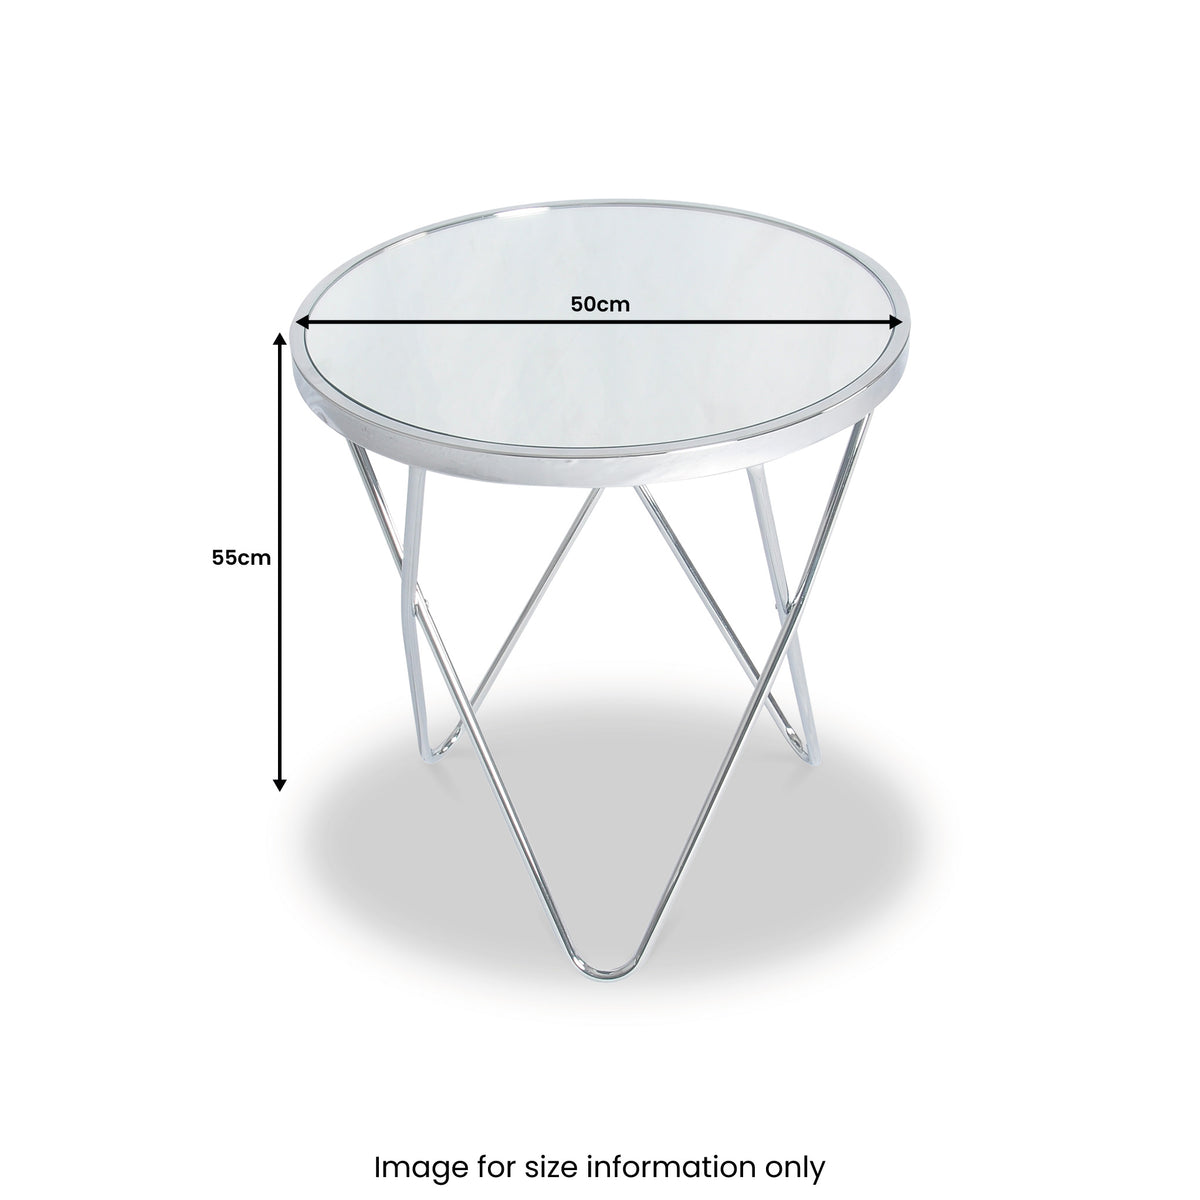 Rhodes Round Lamp Table dimensions